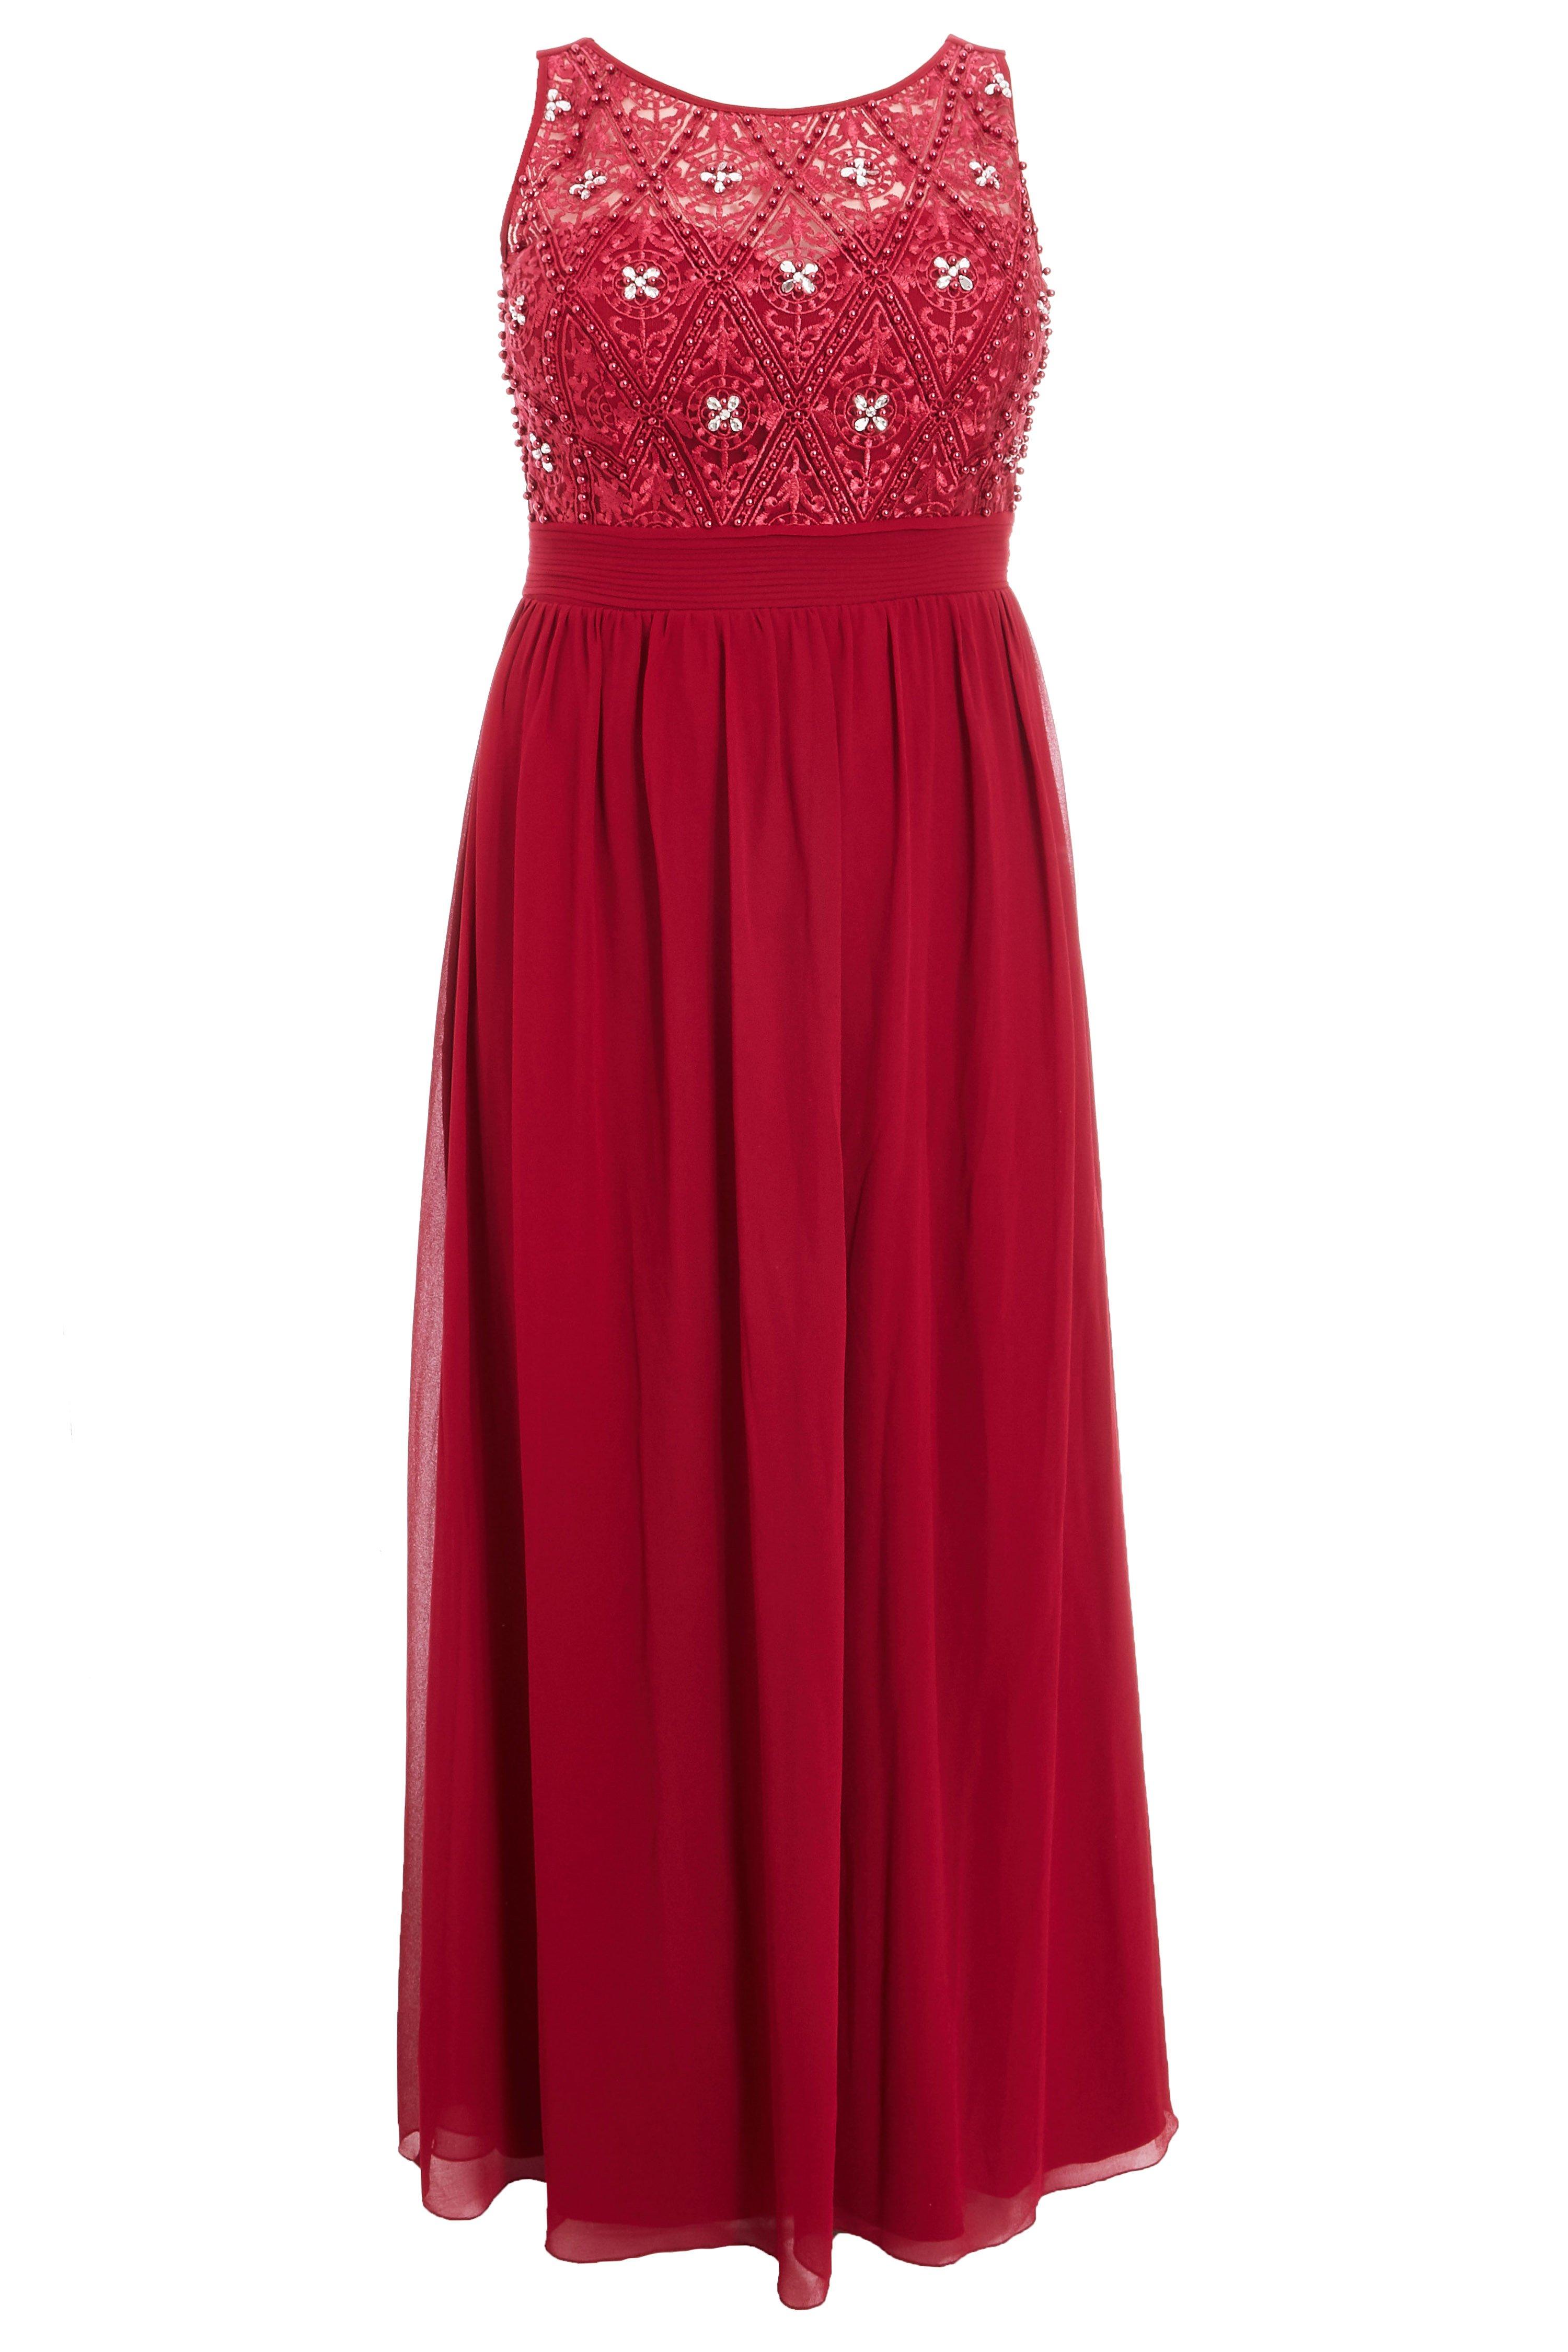 Curve Berry Chiffon Embroidered High Neck Maxi Dress - Quiz Clothing